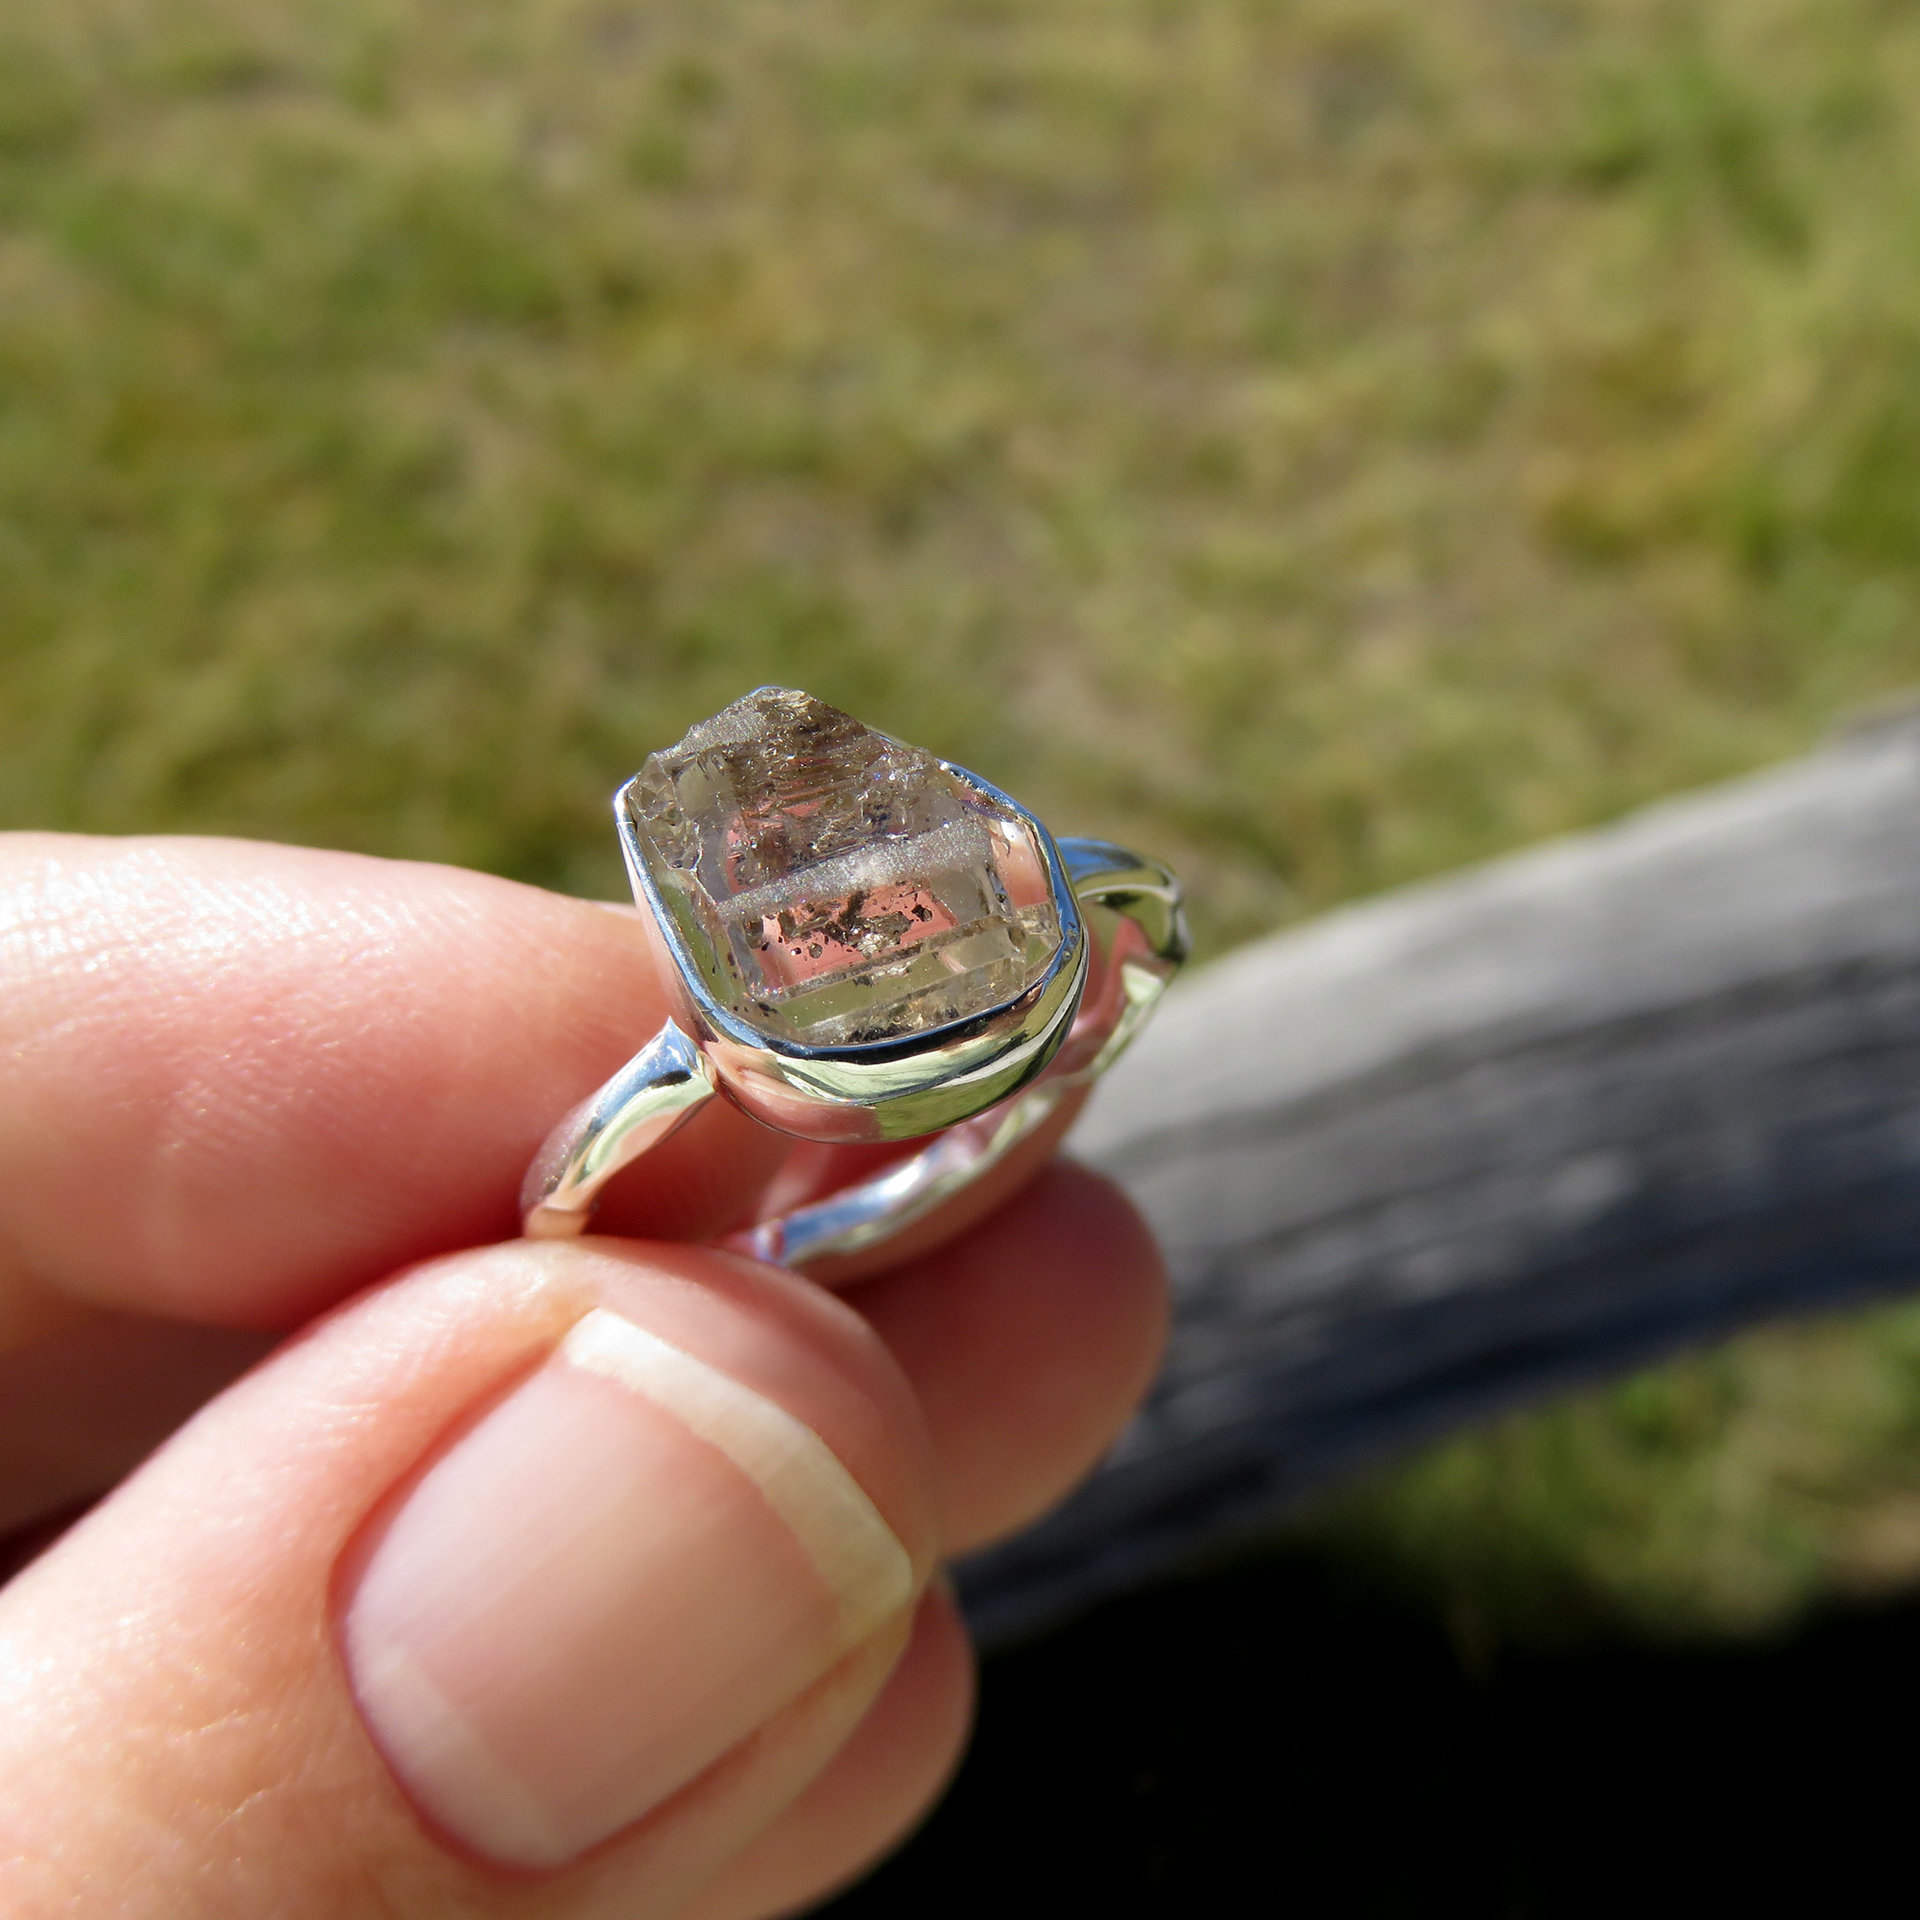 Herkimer Diamond Ring Size 8 Q 57 Hammered 925 Sterling Silver